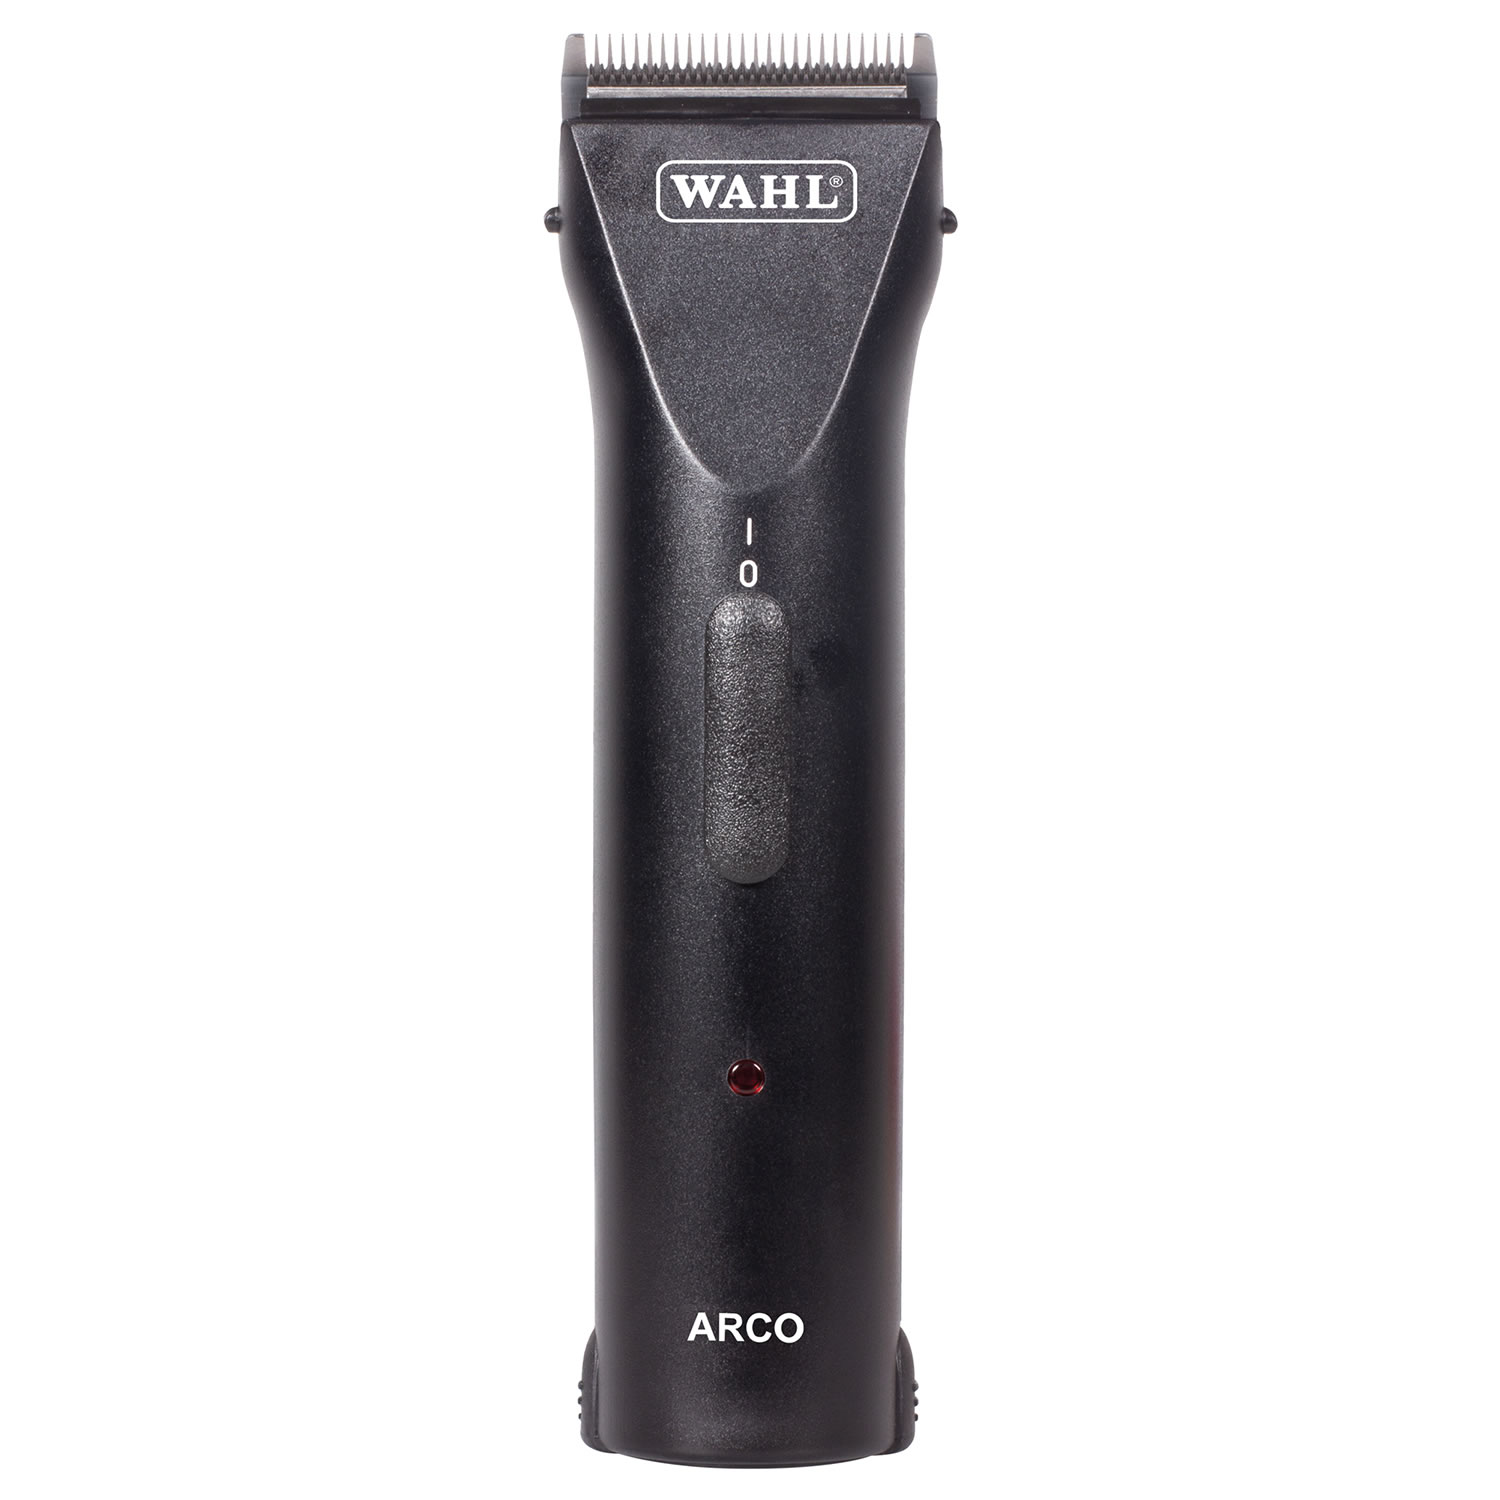 WAHL ARCO CLIPPER KIT